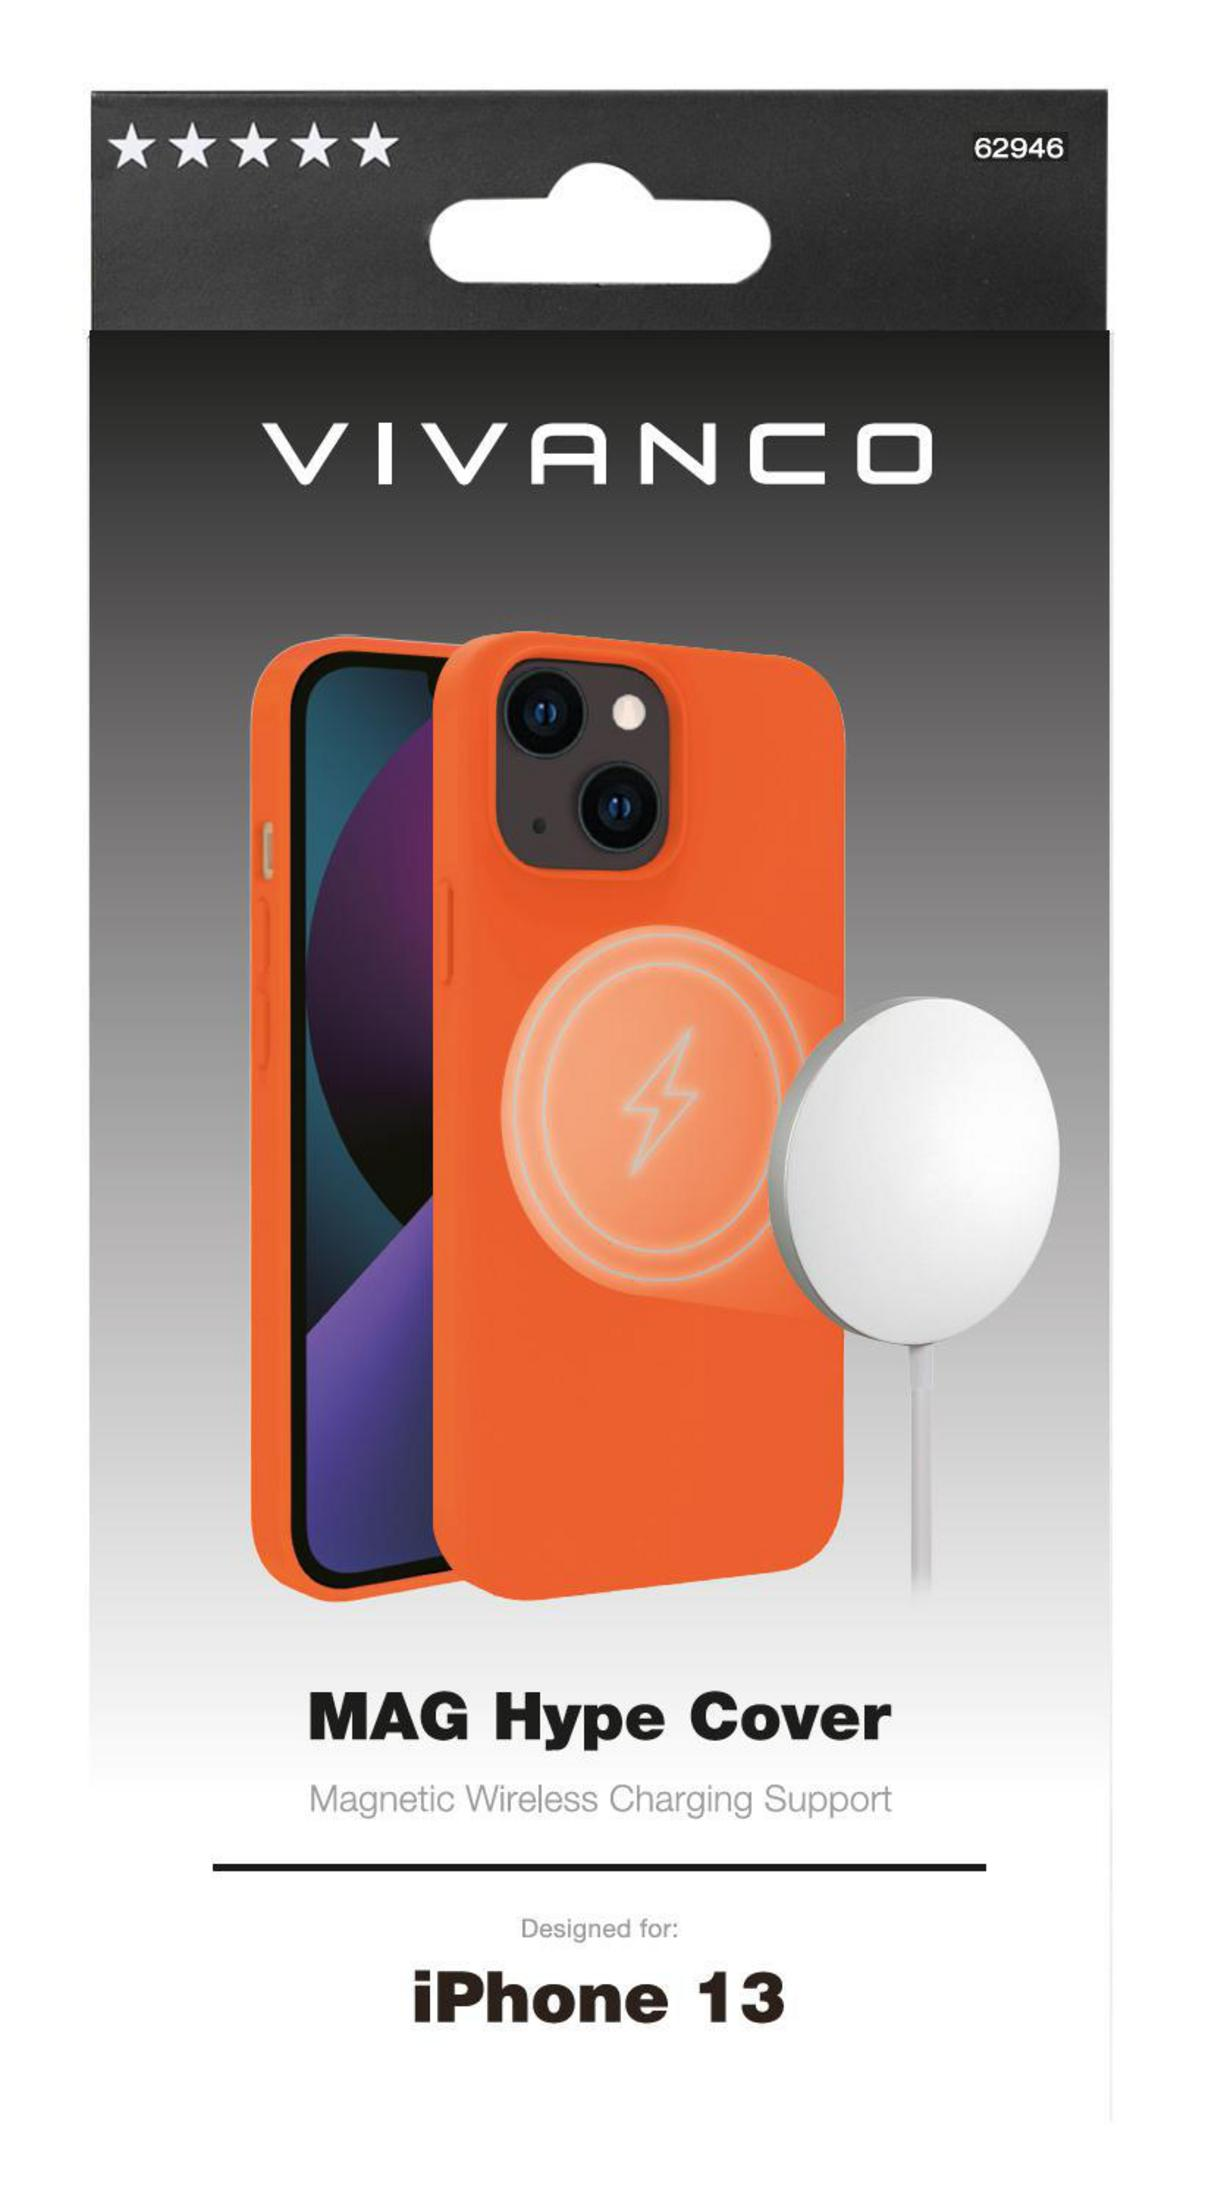 Orange iPhone 13, COVER MAGHYPE Backcover, OR, Apple, 62946 IPH13 VIVANCO